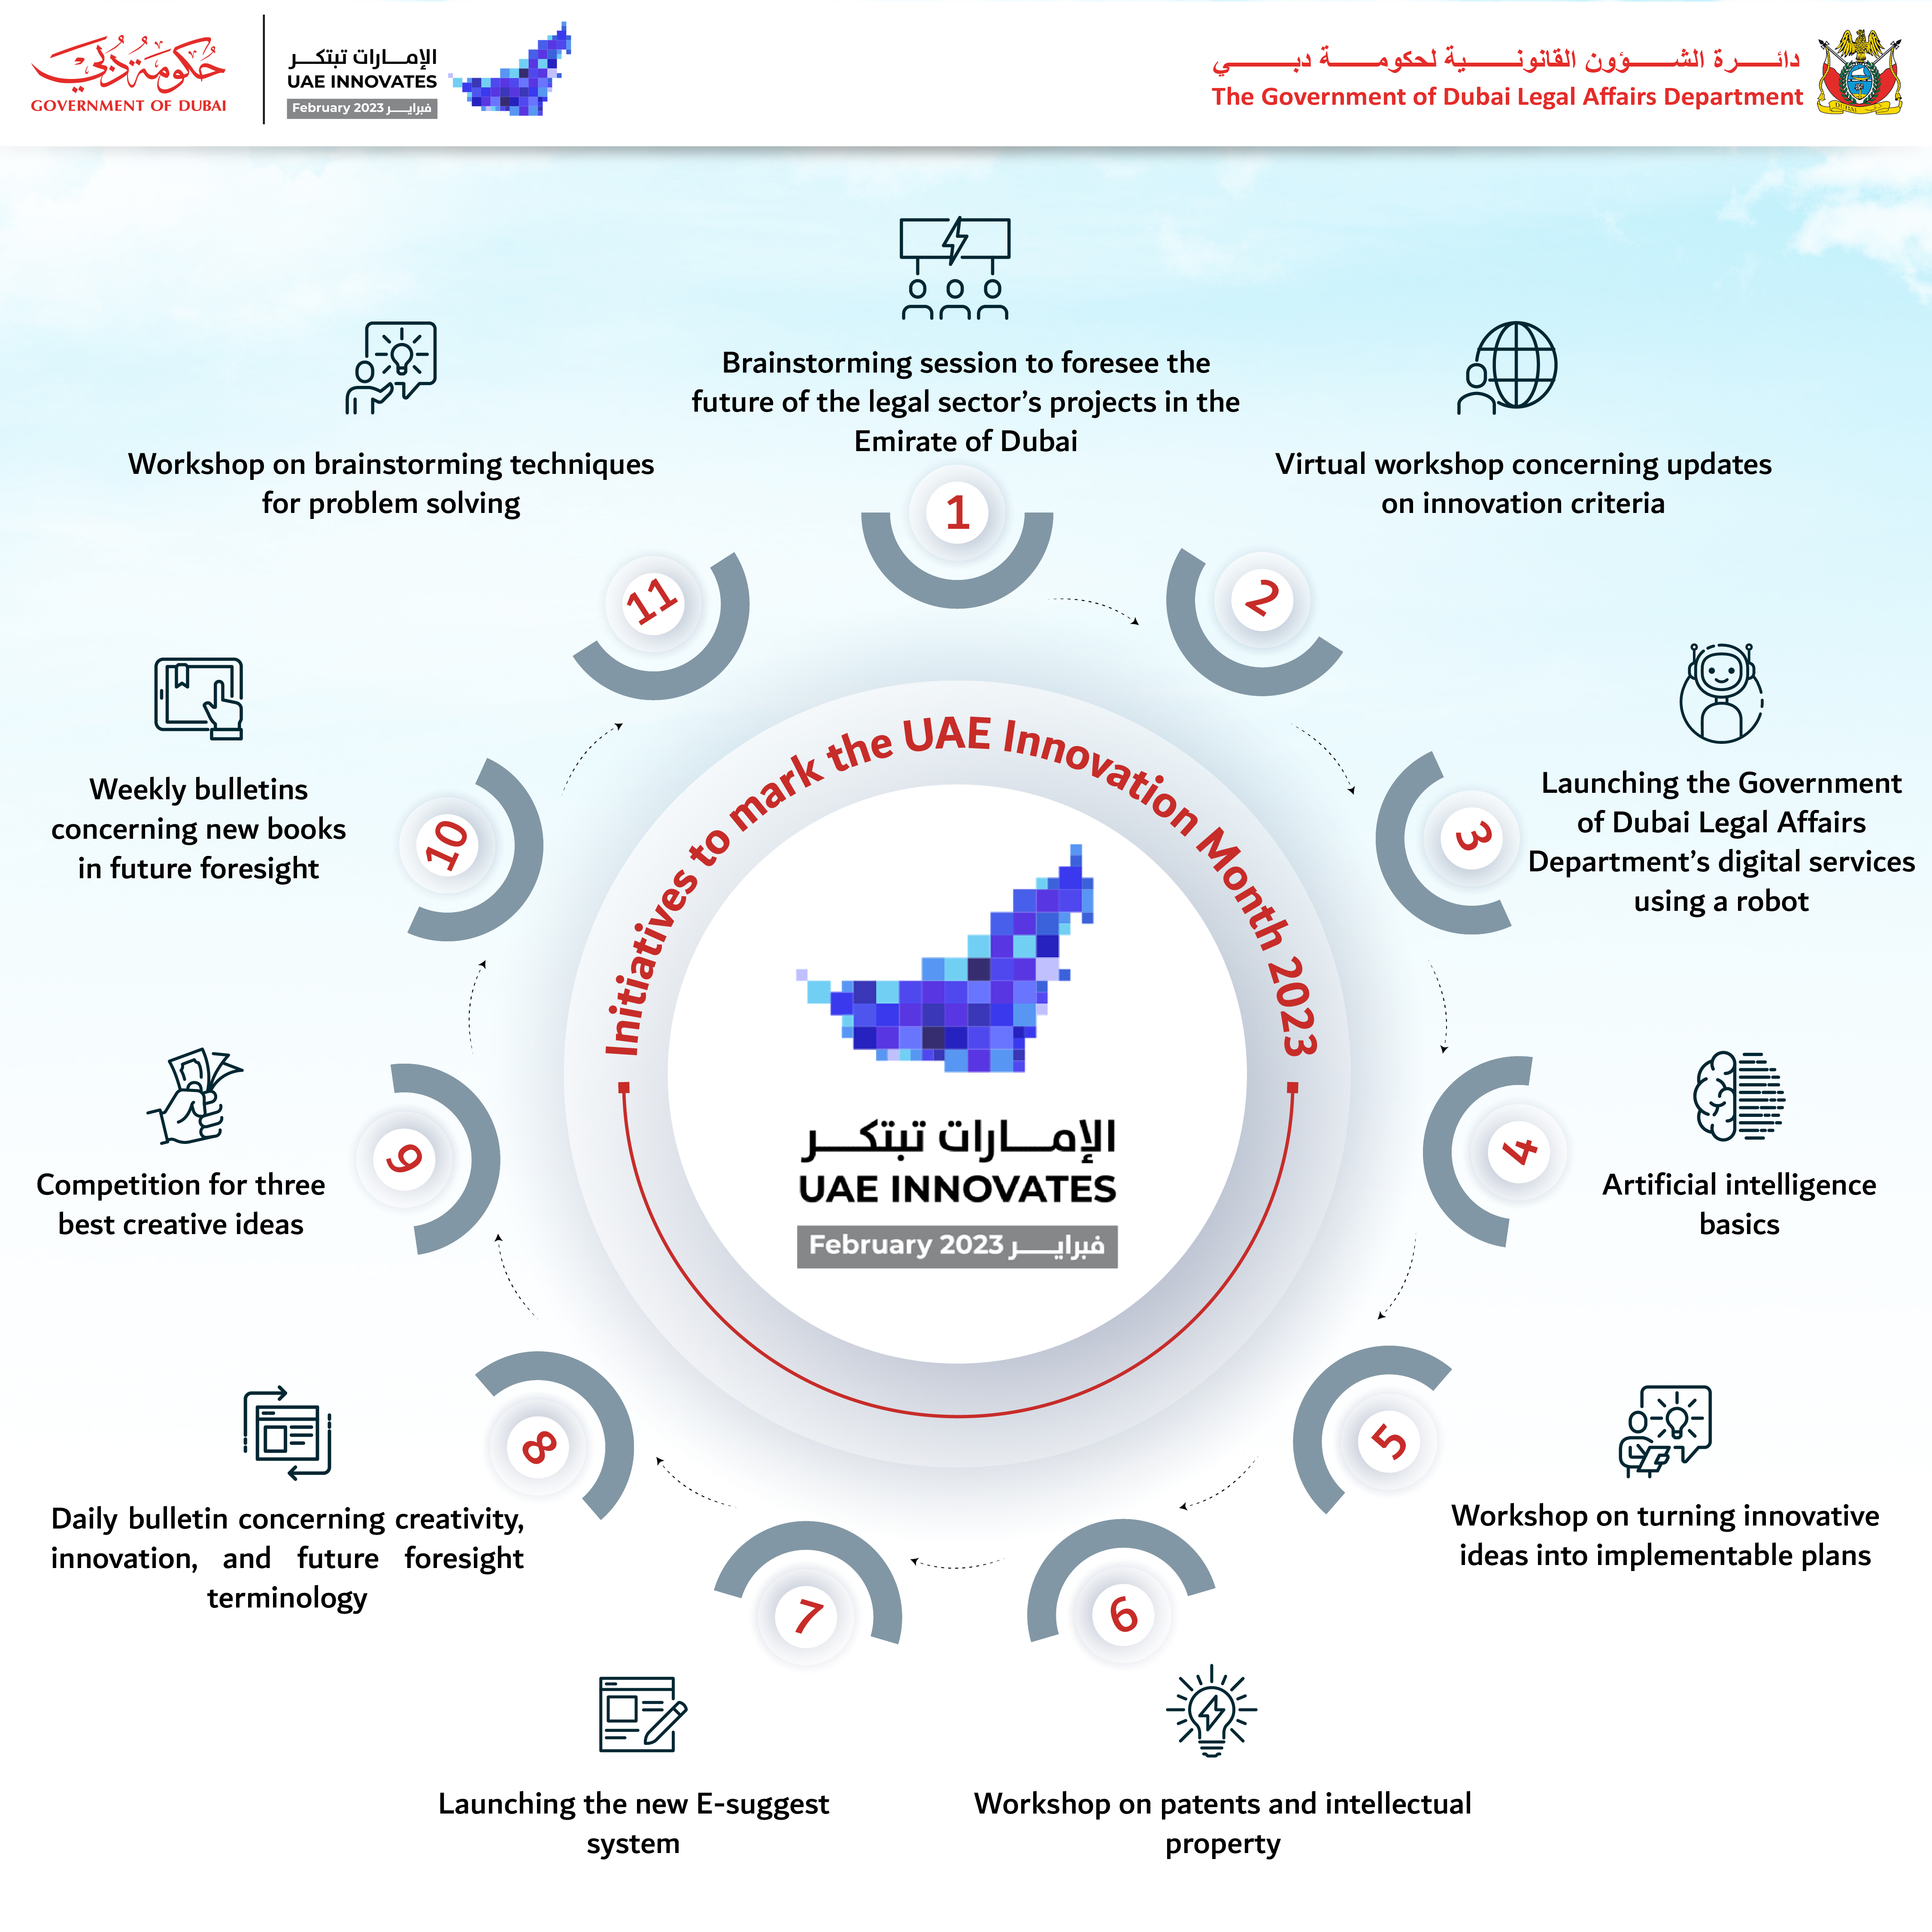 To enhance the capabilities of its human resources in shaping the future